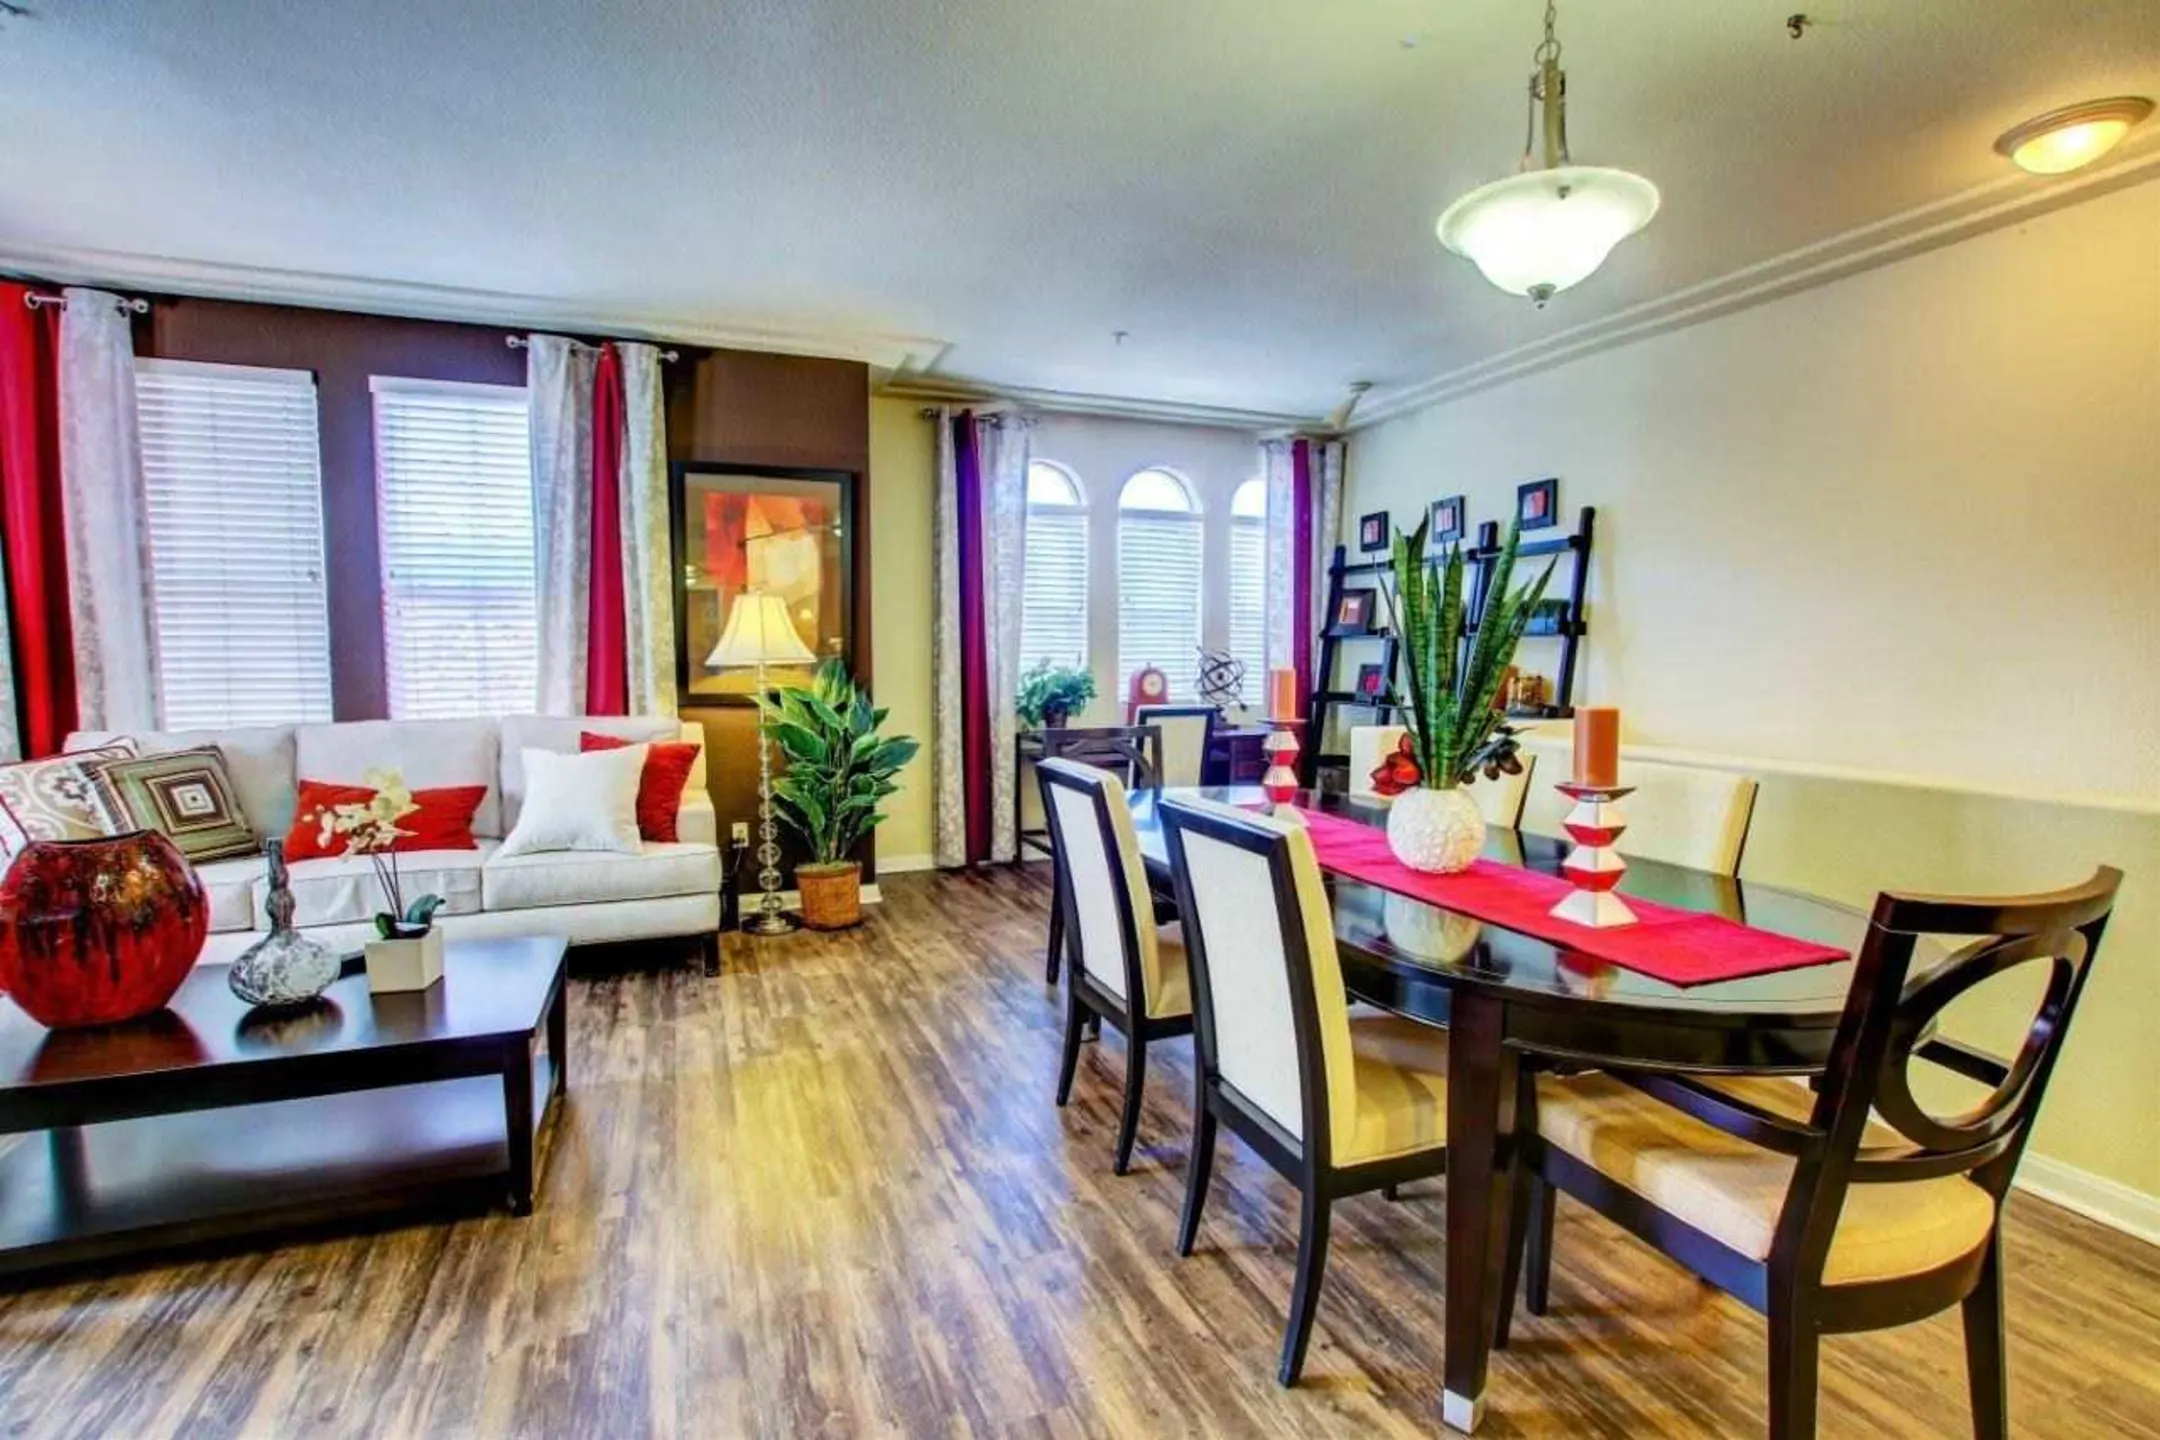 Dining Room - Prominence Apartments - San Marcos, CA